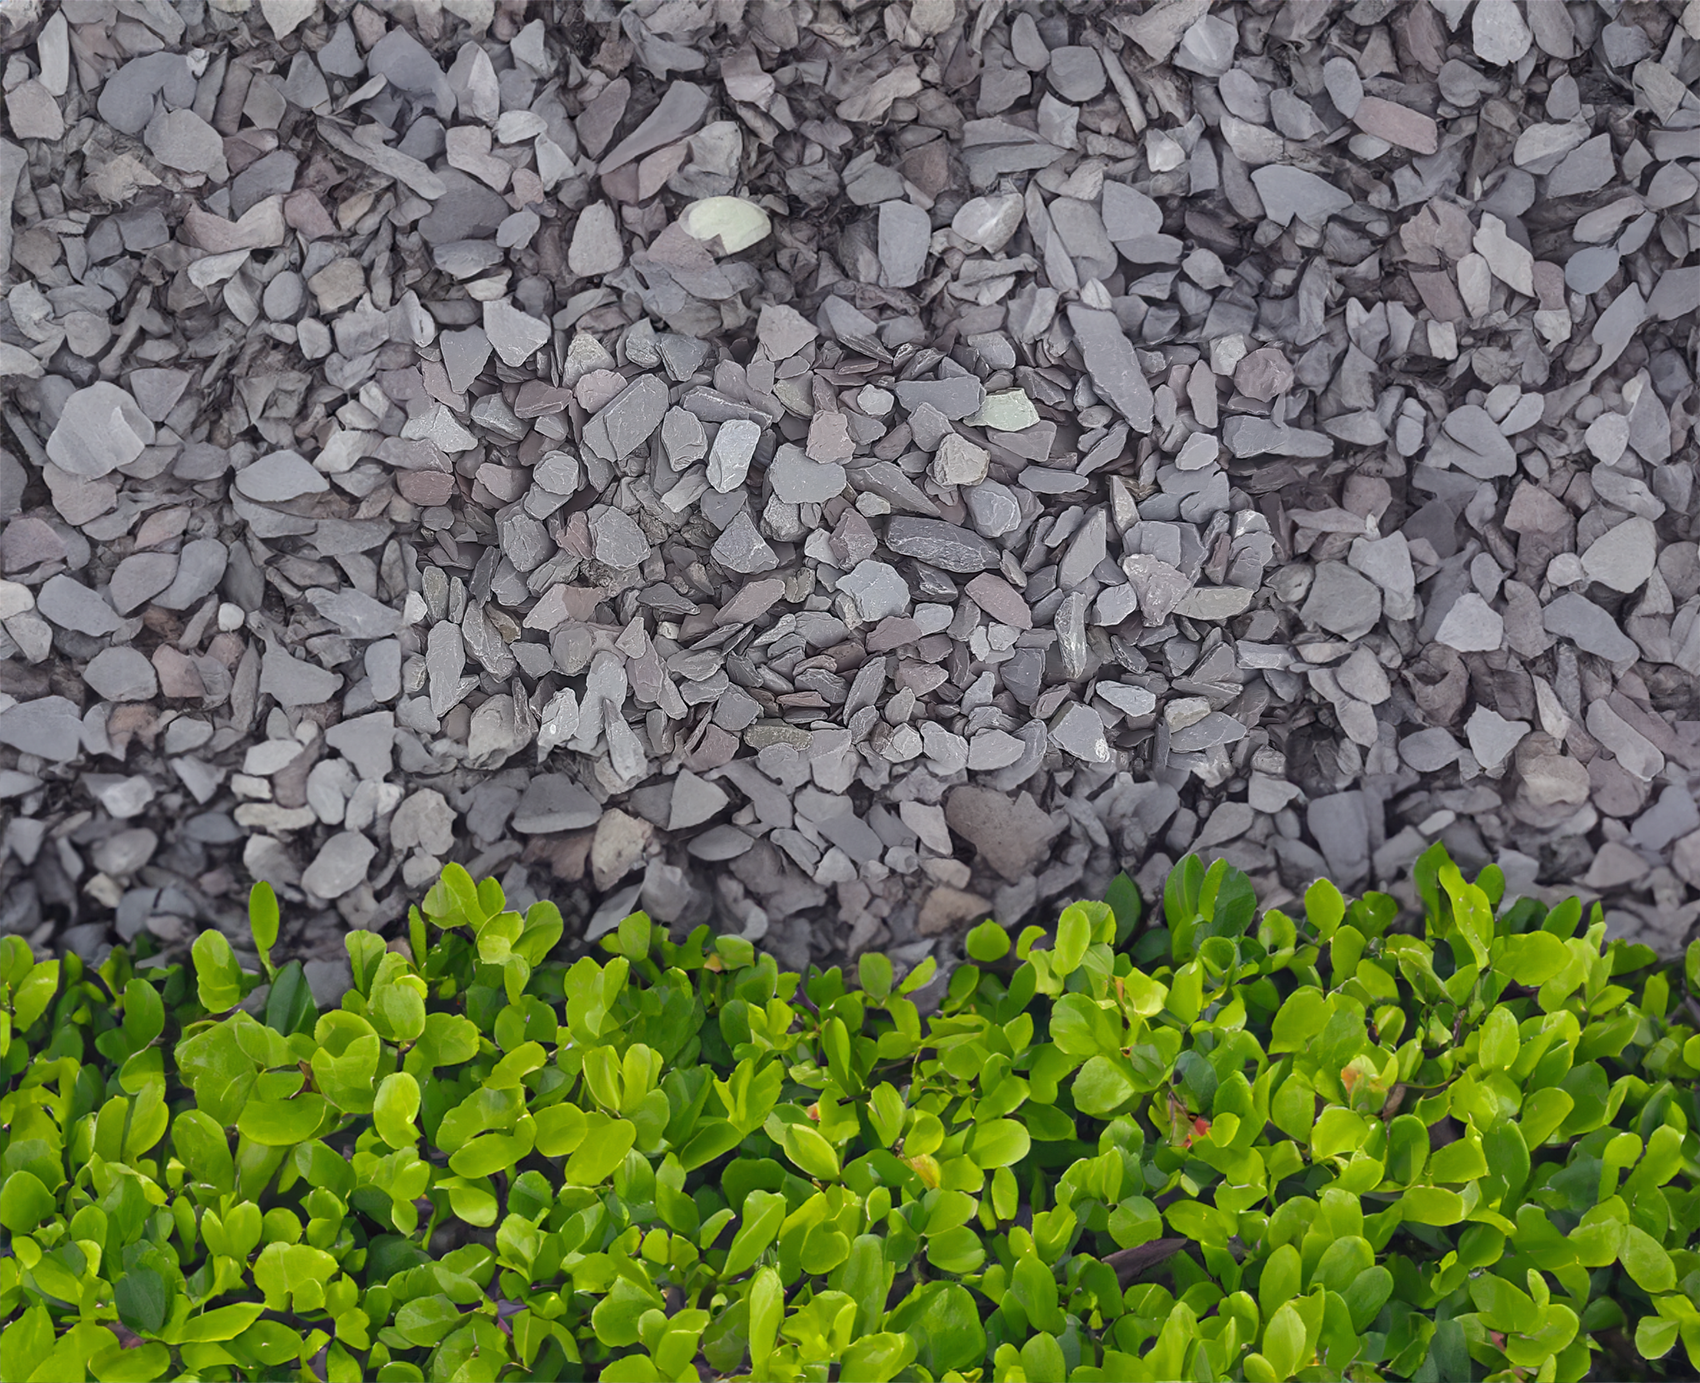 A decorative garden border with Brisks 20mm Mixed Blue & Plum Slate Chippings on the top half and vibrant, green foliage covering the bottom half. The contrast between the Brisks 20mm Mixed Blue & Plum Slate Chippings and plants creates a pleasing, textured landscaping design.